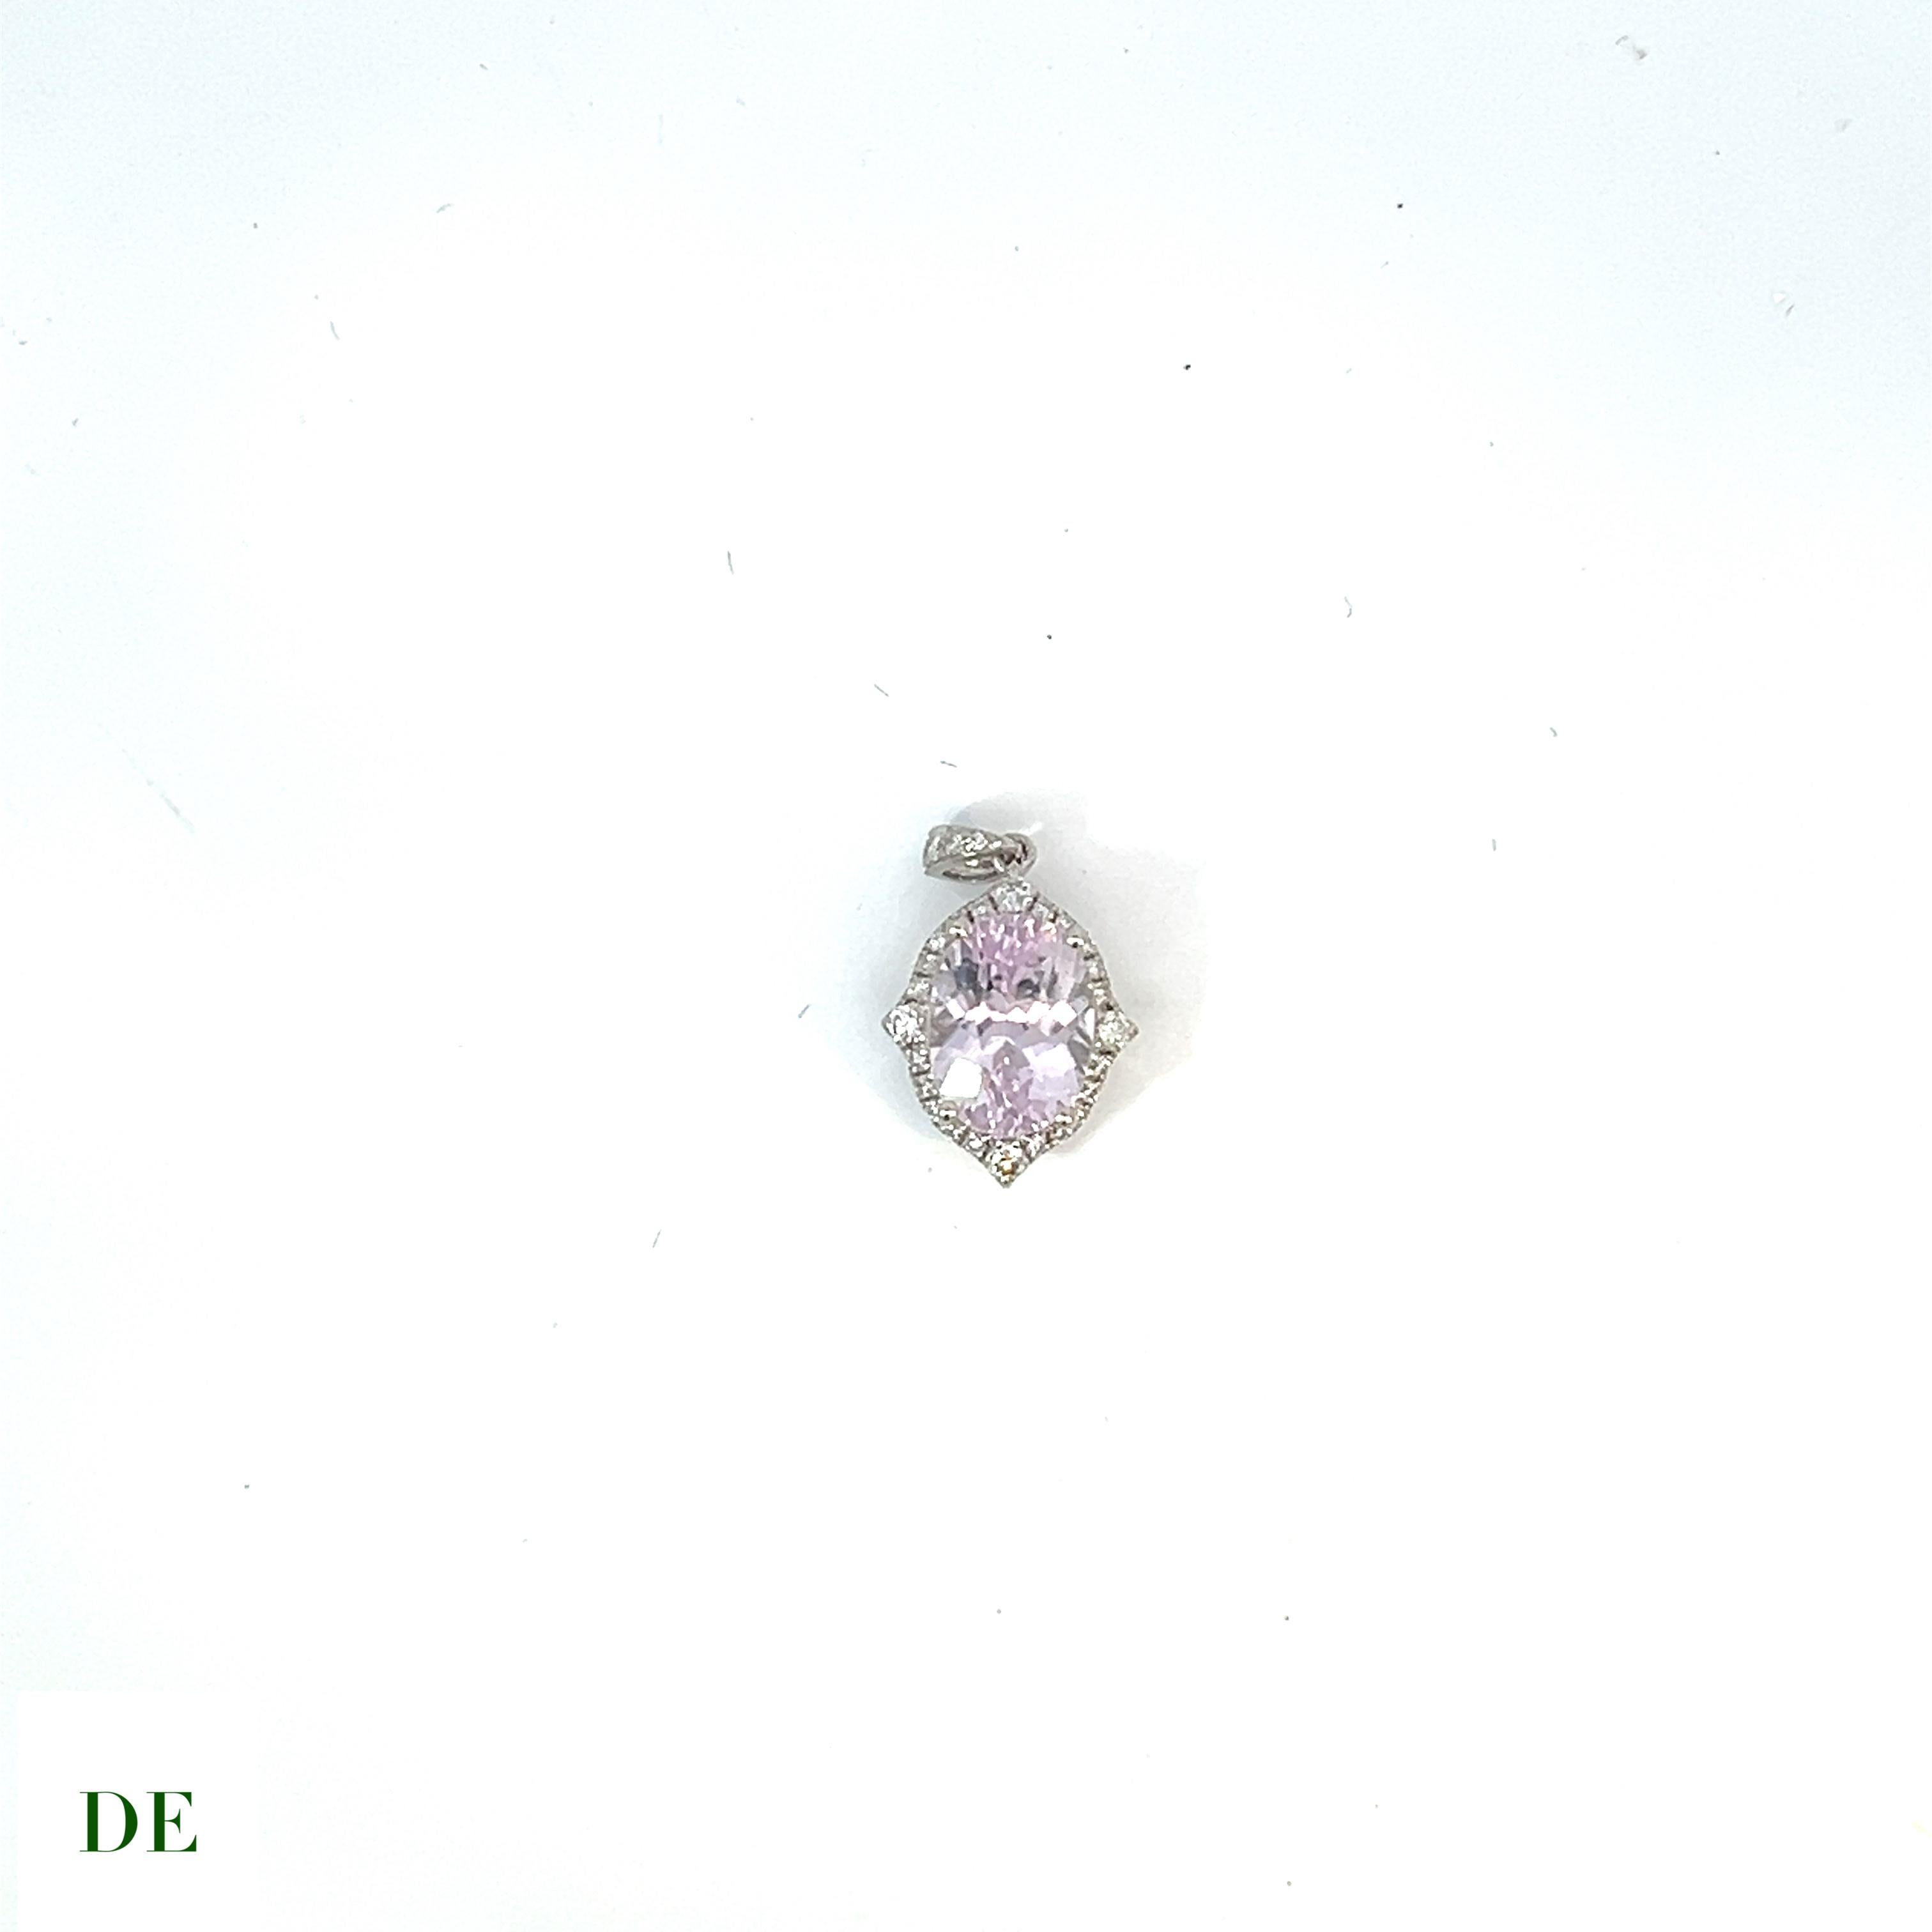 Radiant Sophistication: Elegance 14k Timeless Classic Barbie Pink Pendant with 3.69 ct Kunzite and Diamond

Indulge in the epitome of elegance with this exquisite 14k Timeless Classic Barbie Pink Pendant. The centerpiece of this pendant is a